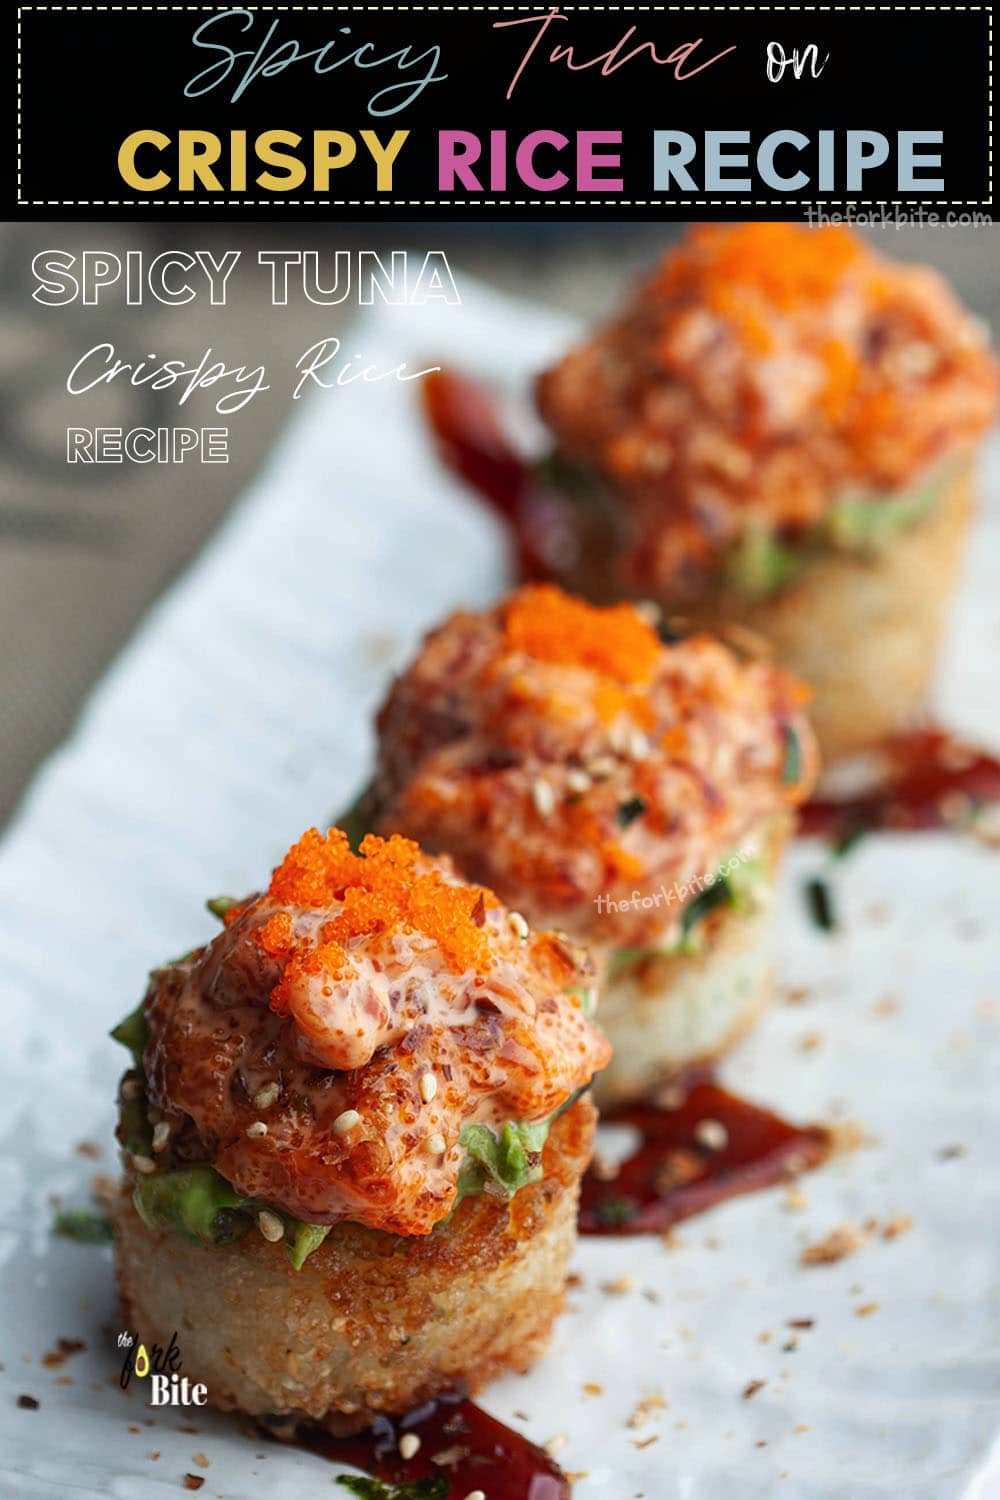 You're going to love this Crispy Rice Spicy Tuna Tartare Poppers. Once you sample the delights of these deliciously spiced party pieces, you will want to serve them at your next dinner party or soirée.